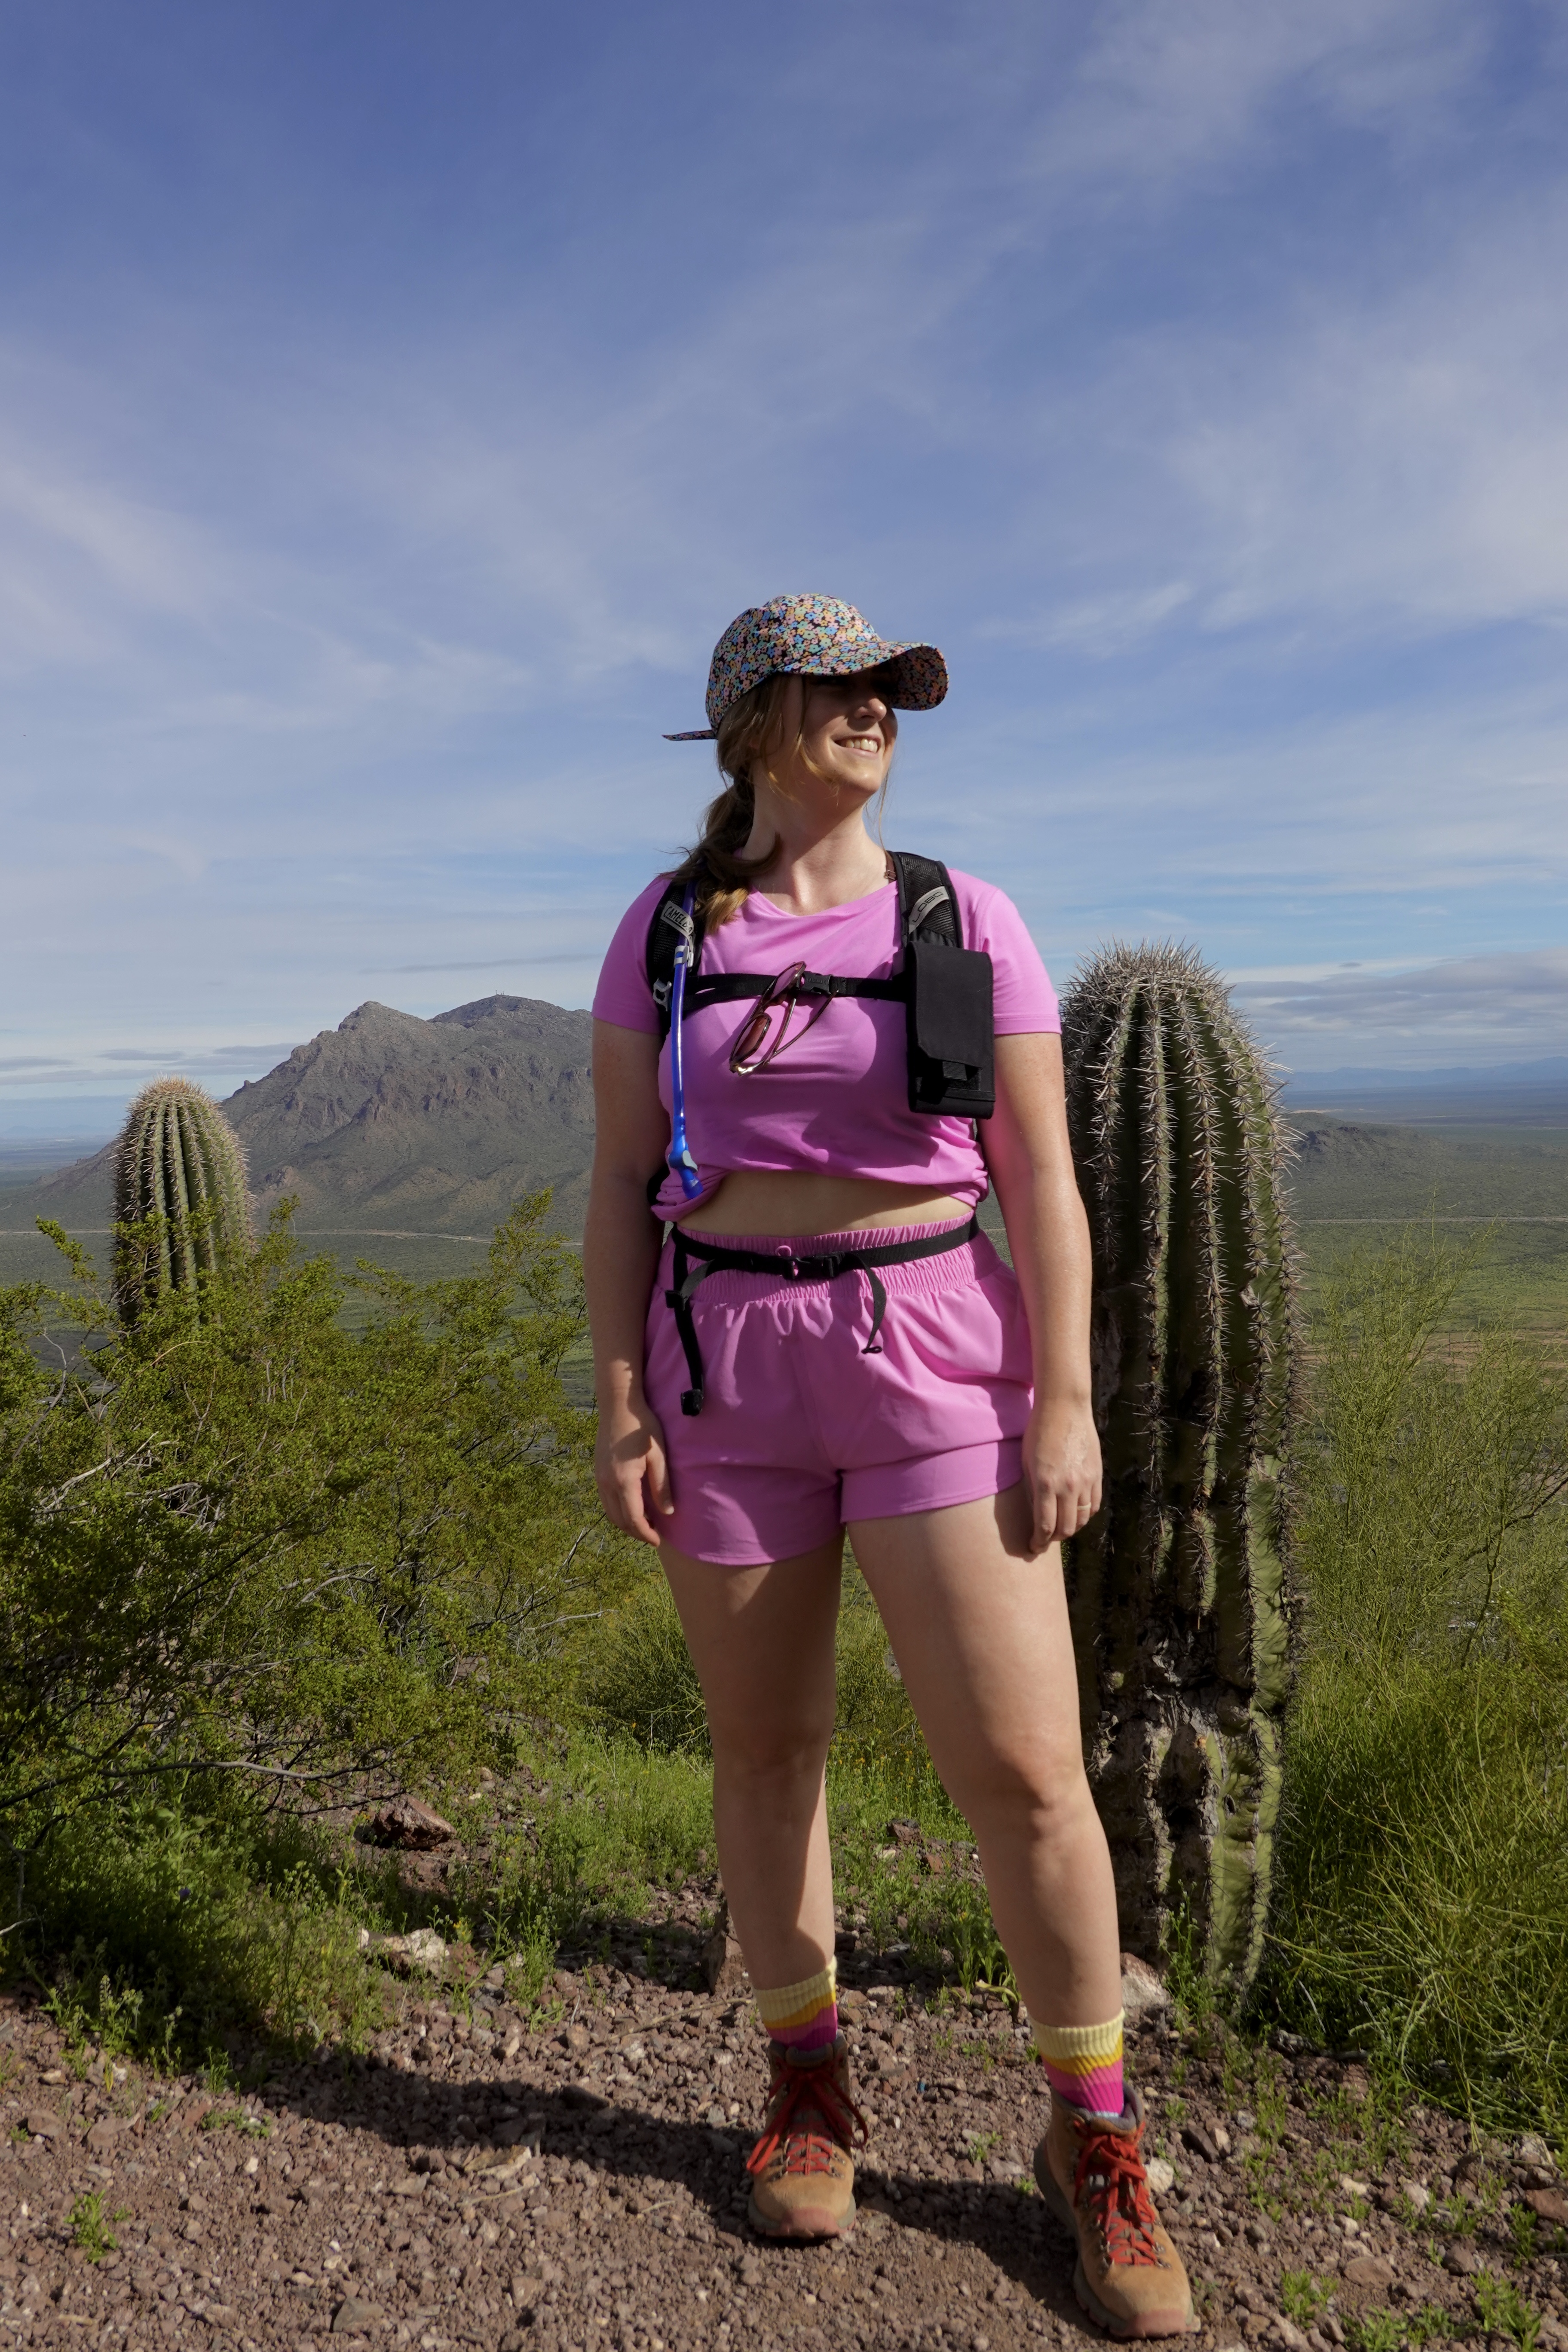 5 Cute Outfit Ideas For Summer Hikes - The Mom Edit